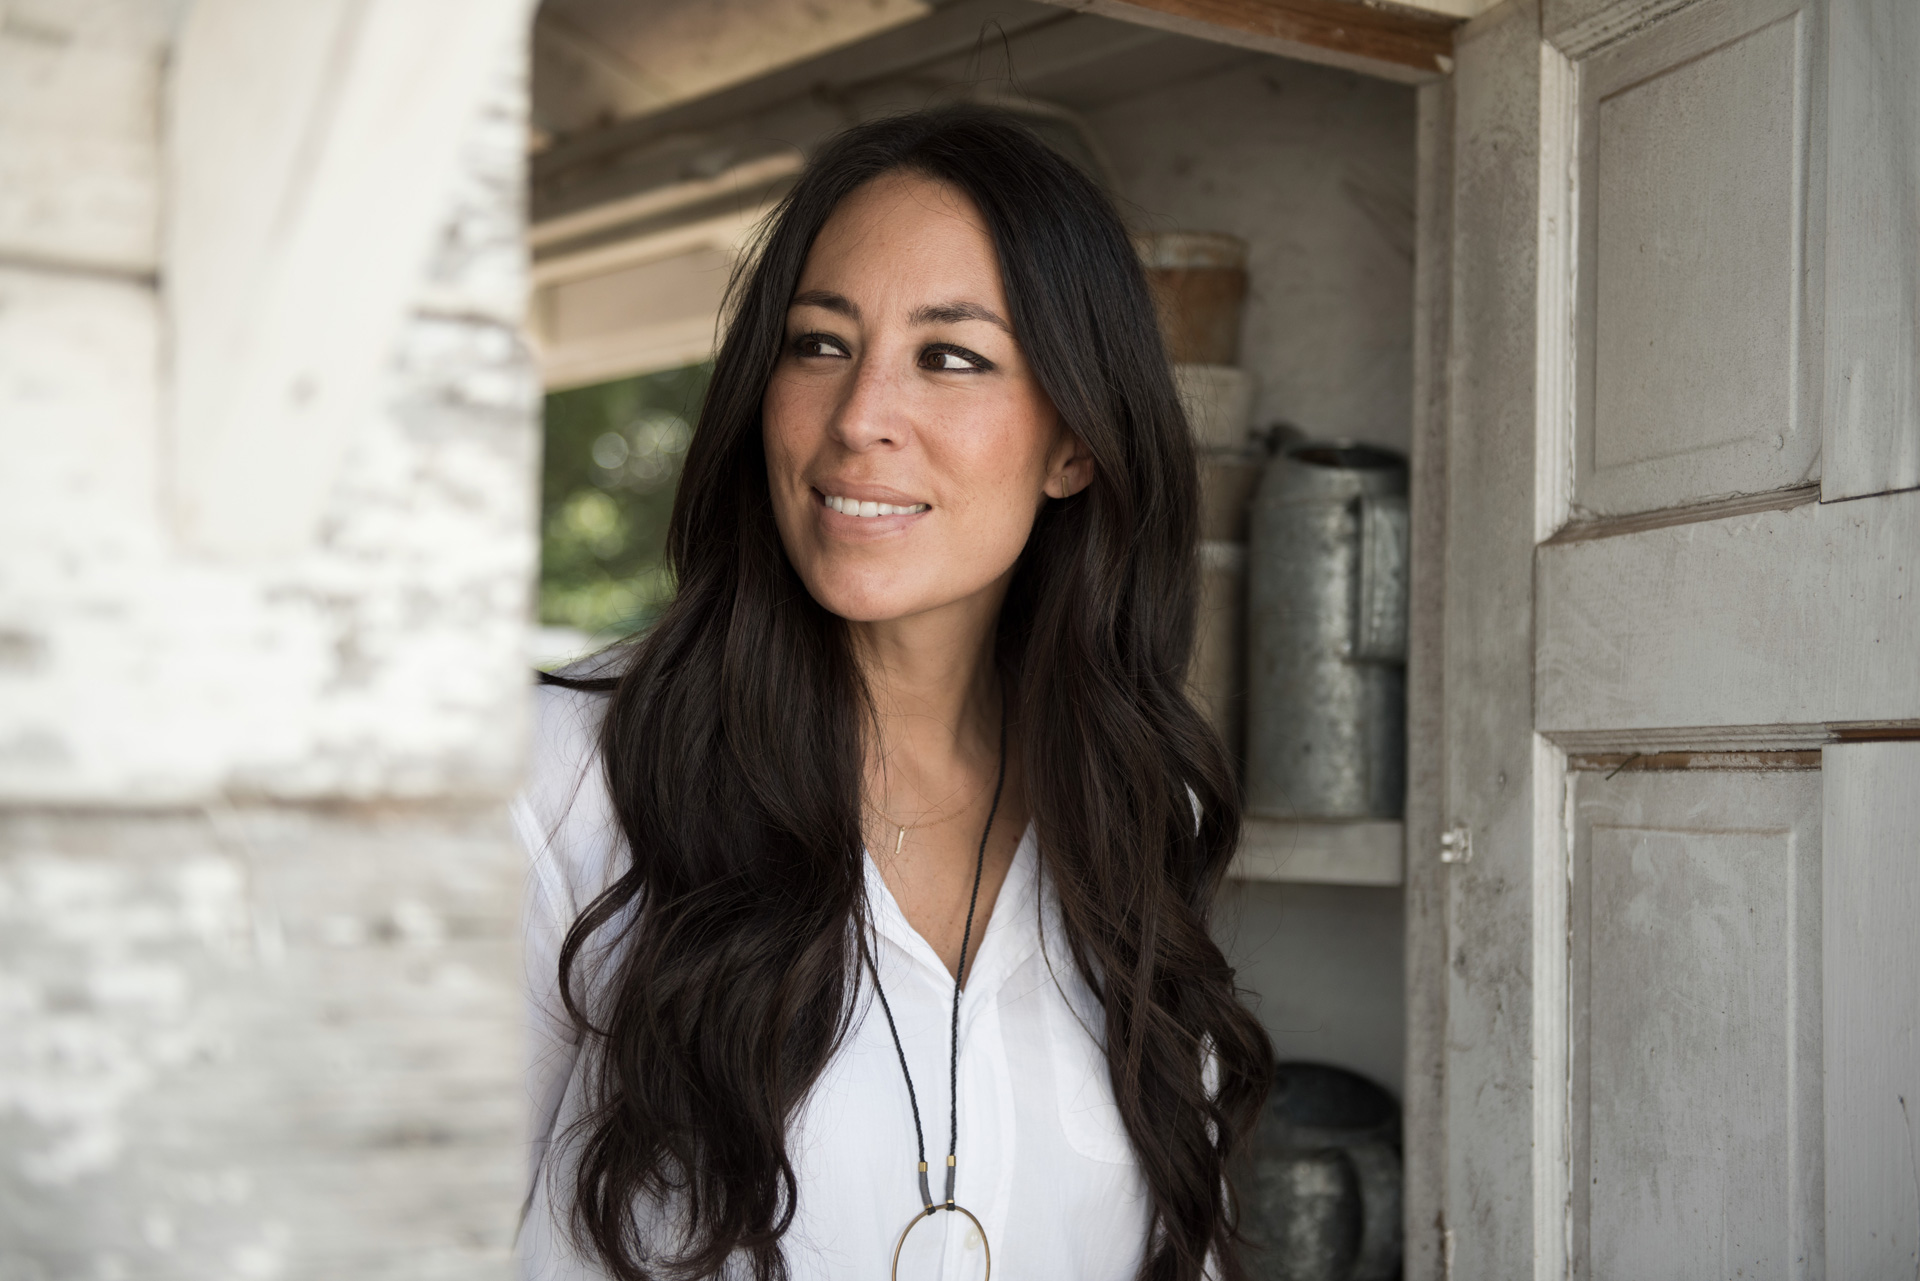 Joanna Gaines Looking Out a Window